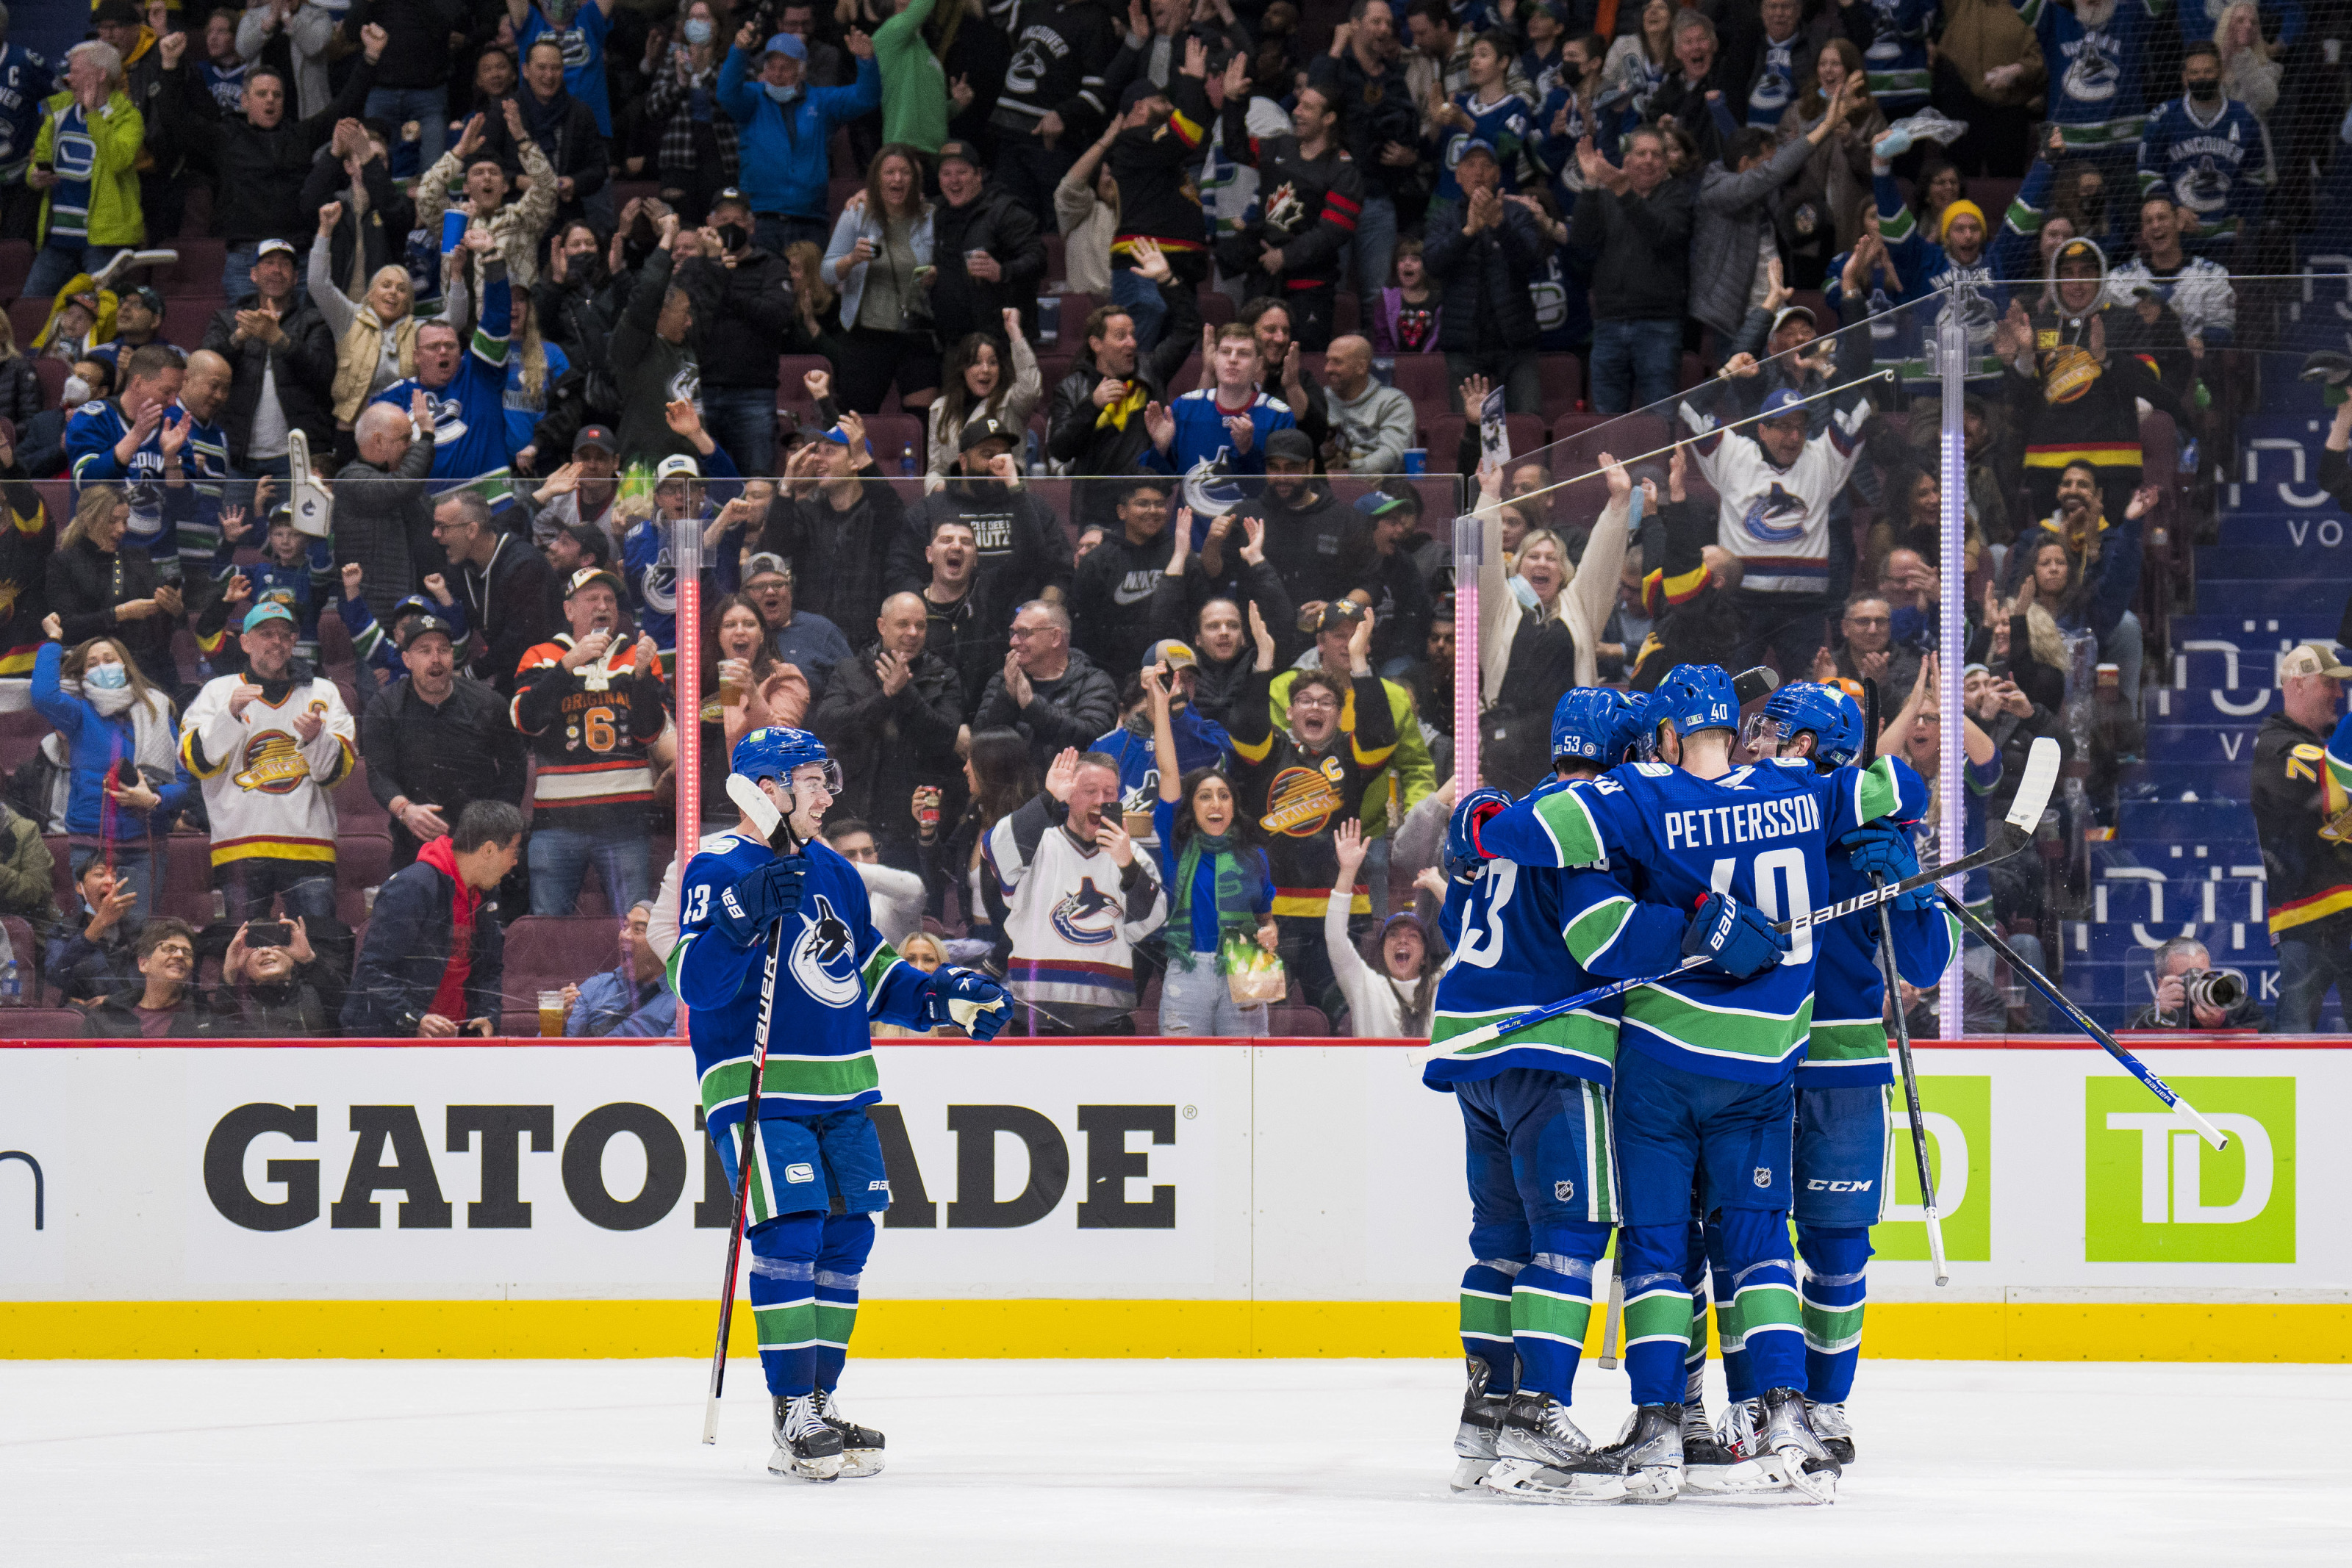 Canucks 2022 offseason moves: Where are they better? And where are